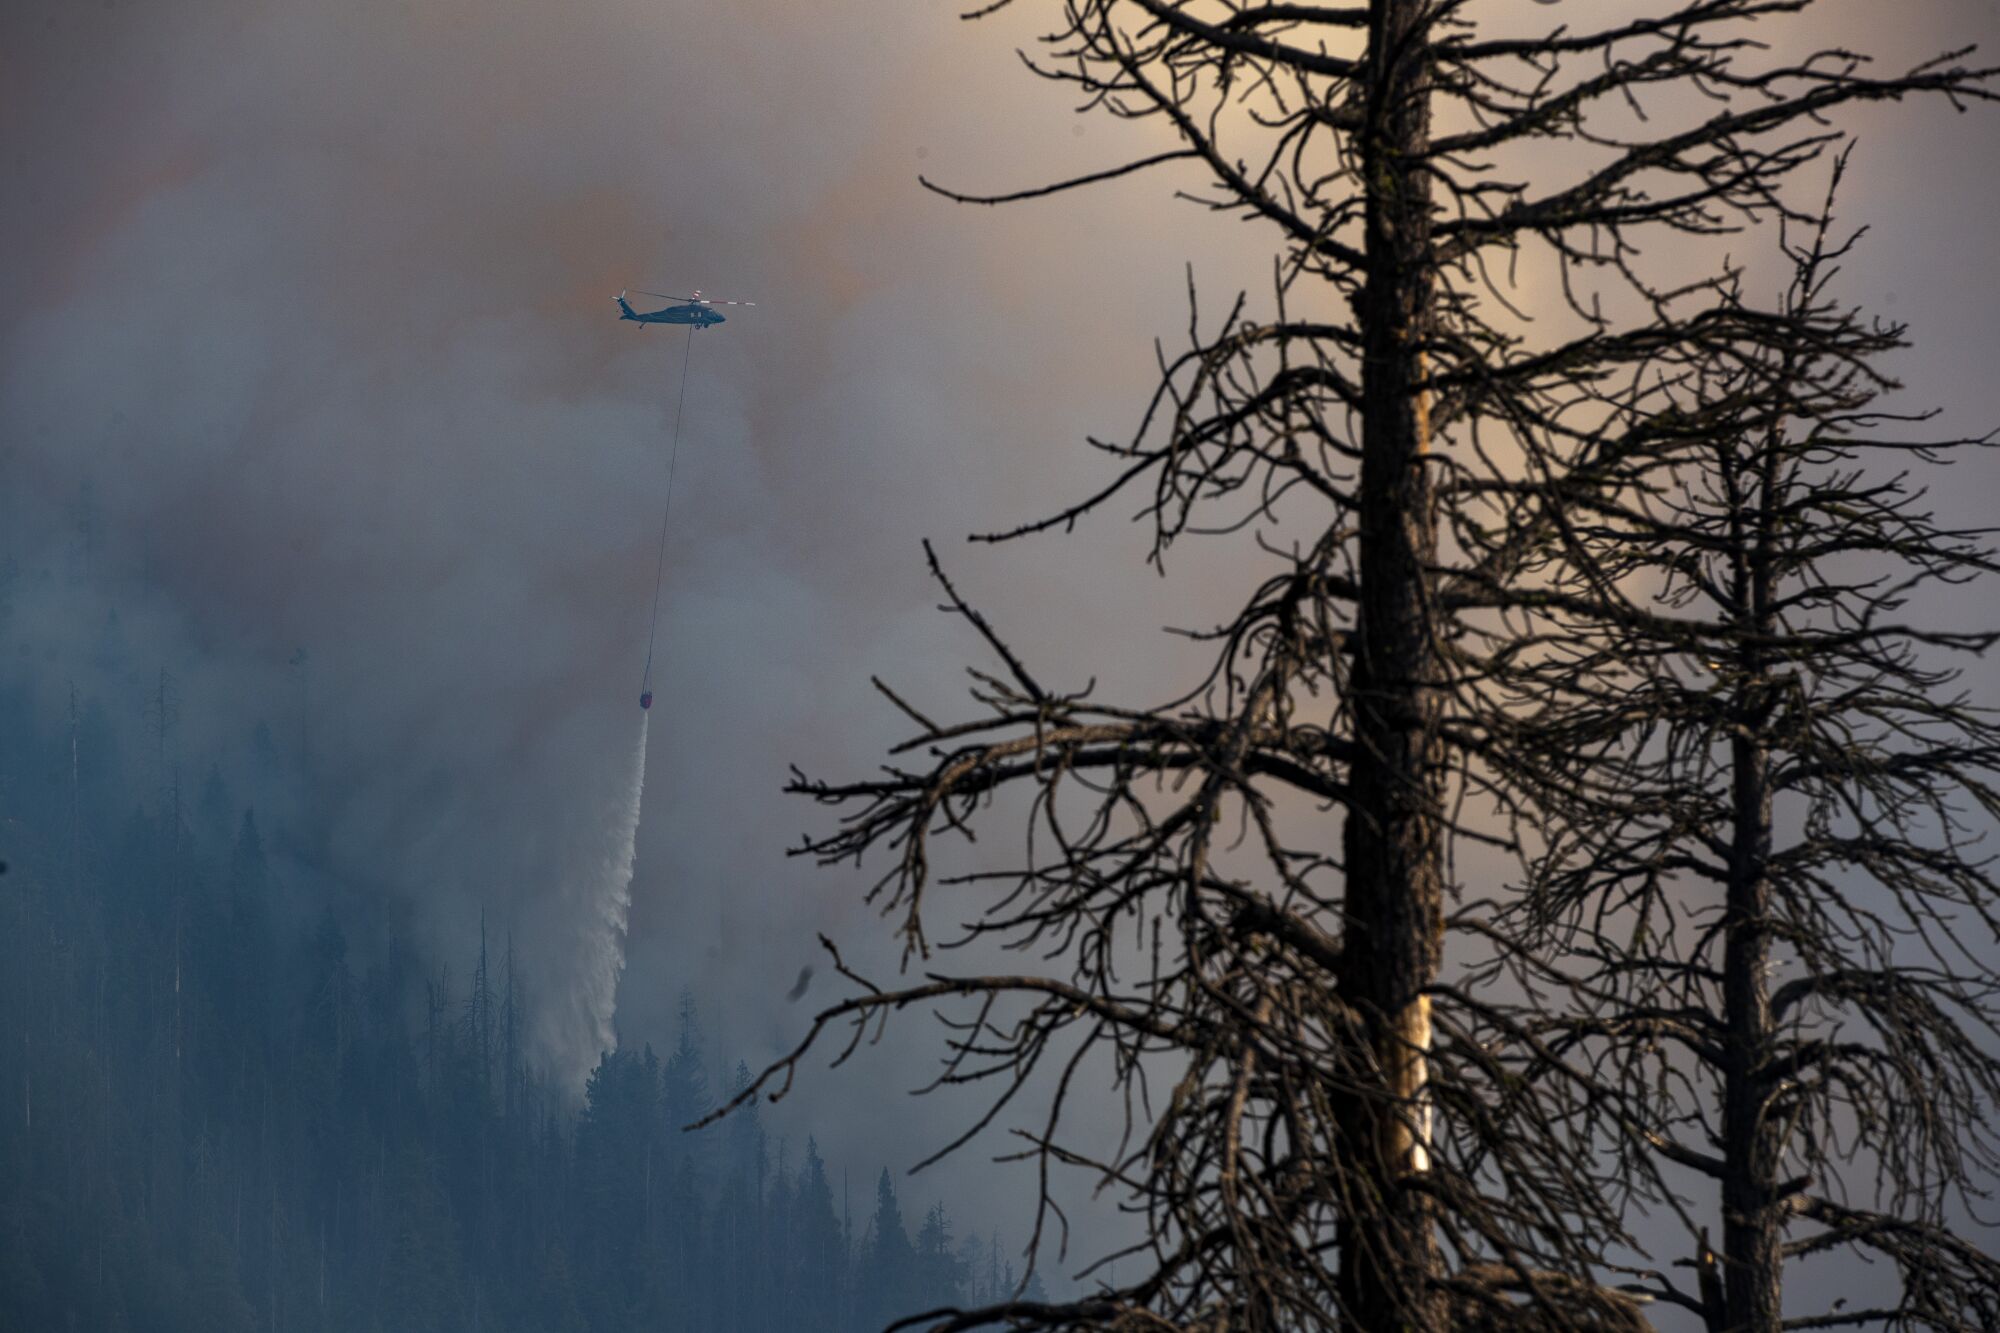 A helicopter drops water on a hillside amid thick smoke